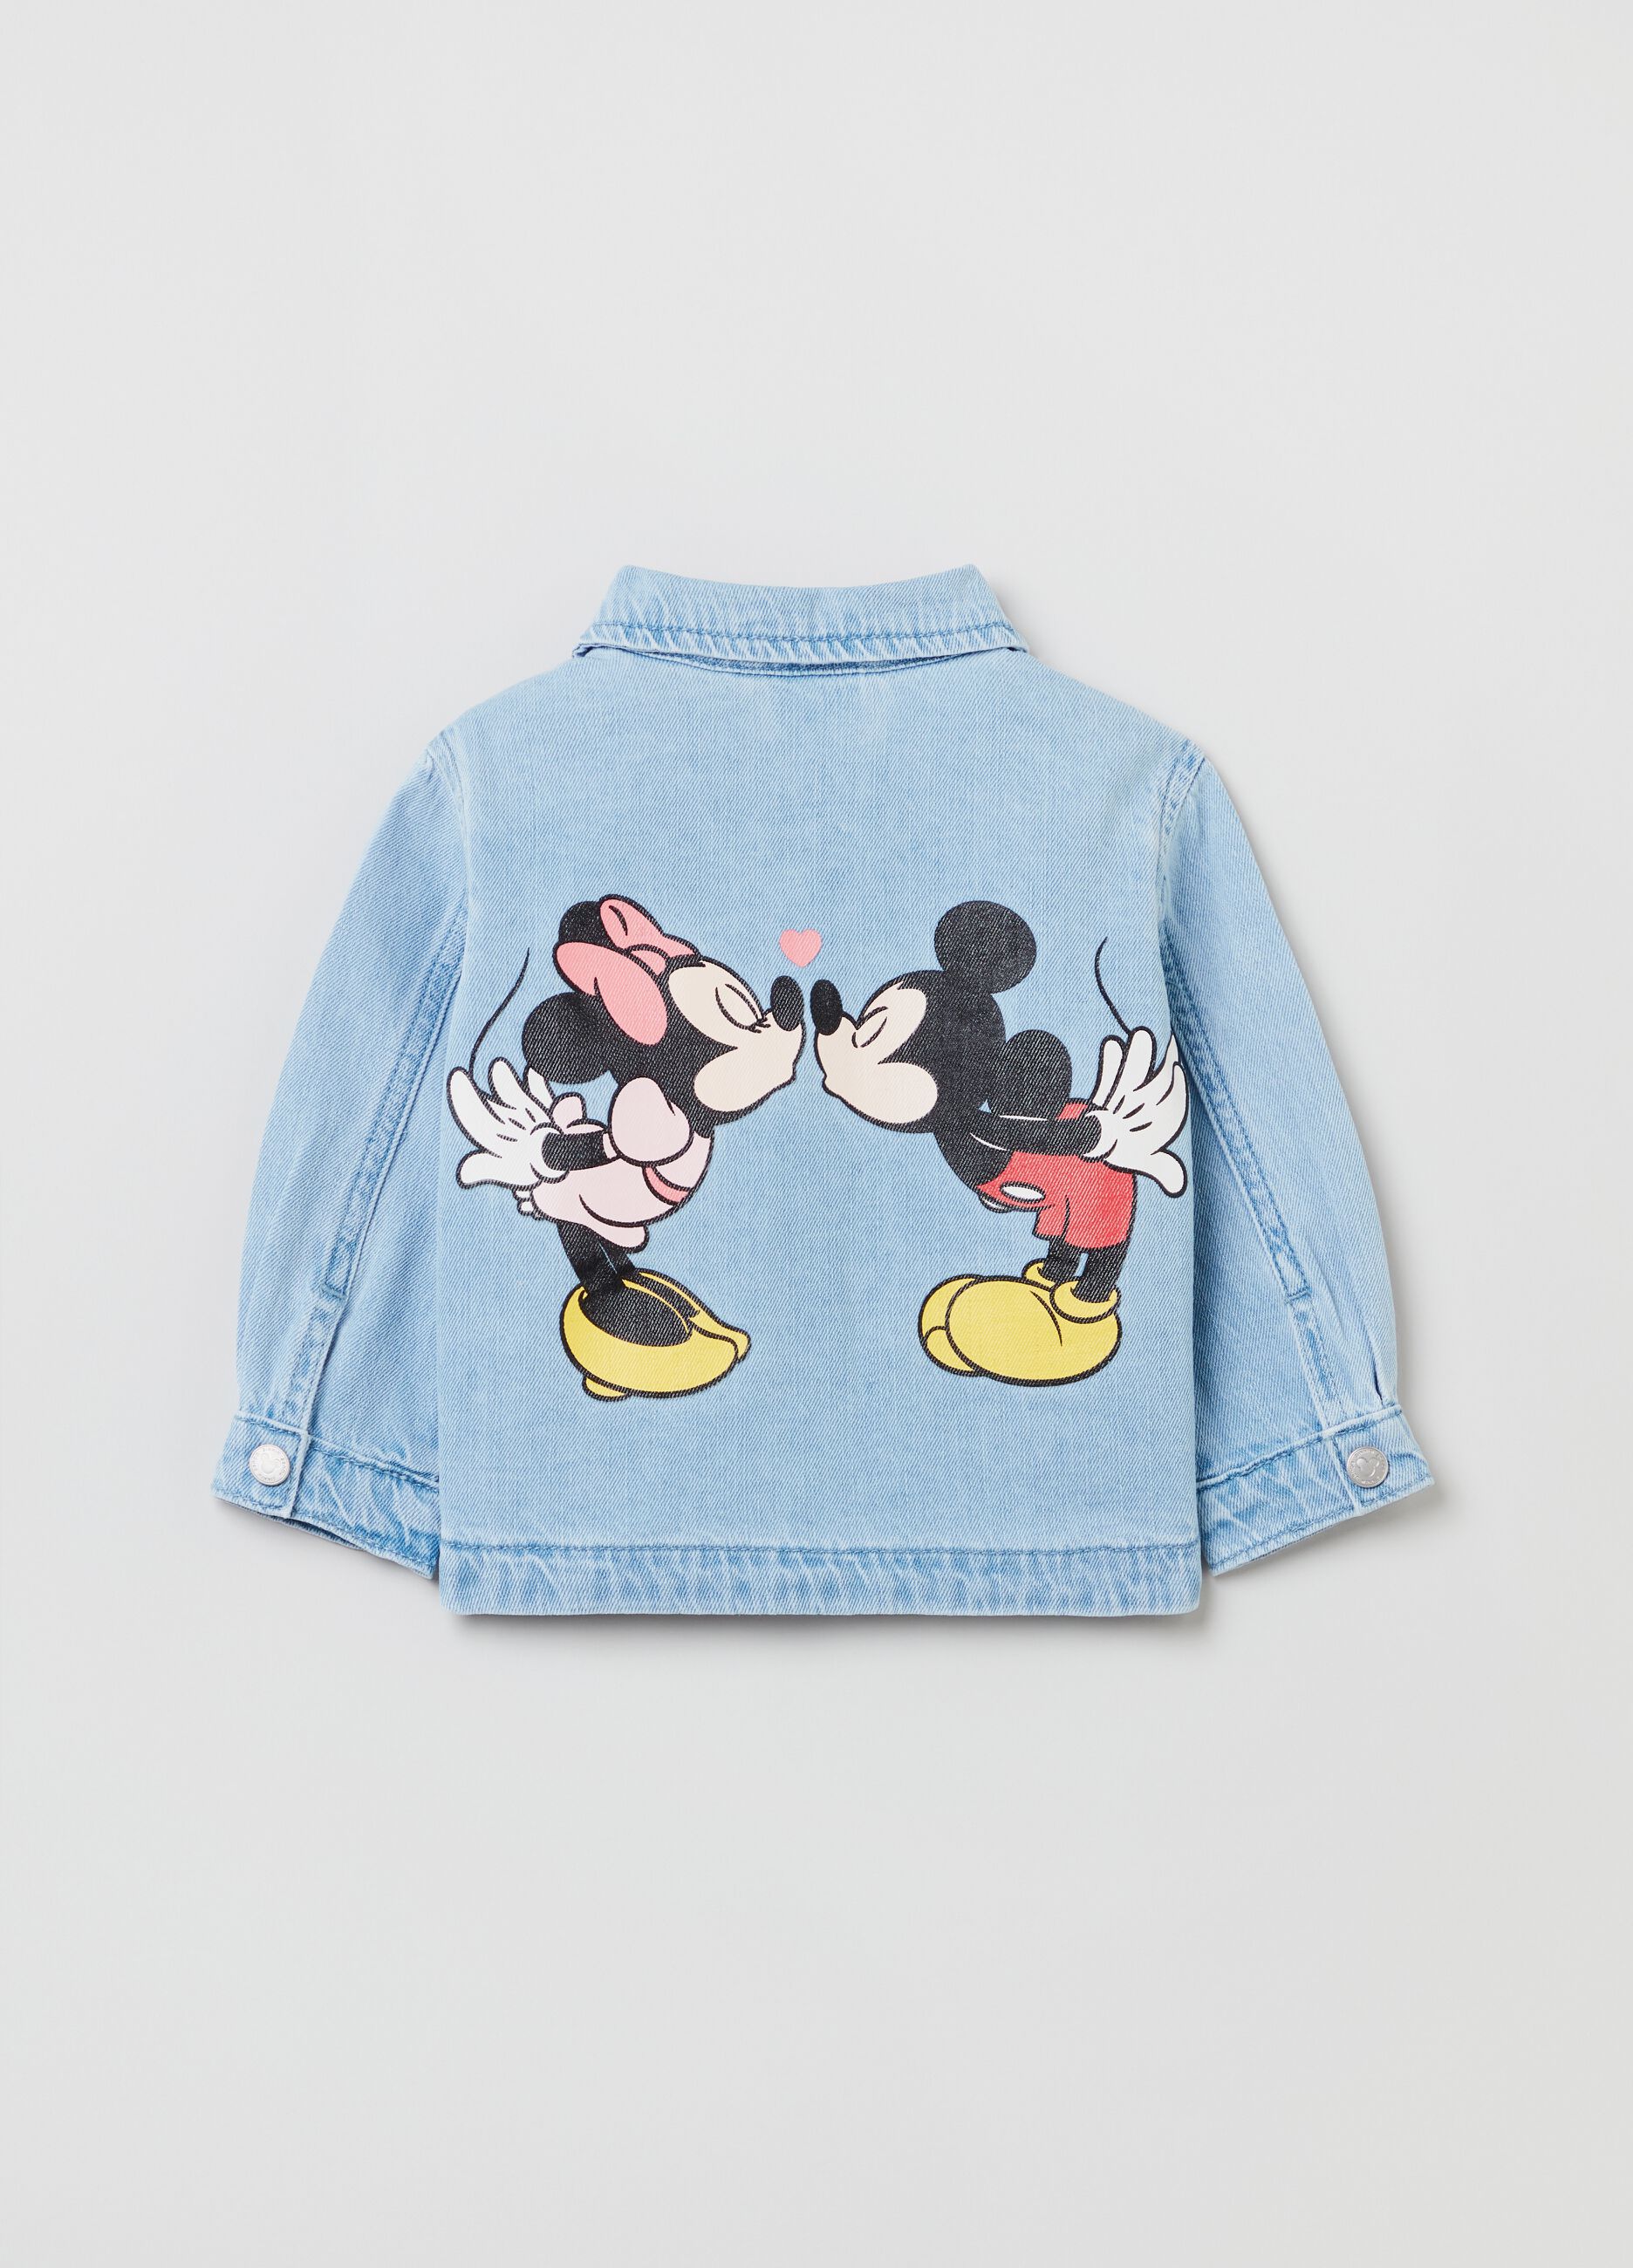 Denim jacket with Minnie and Mickey Mouse print